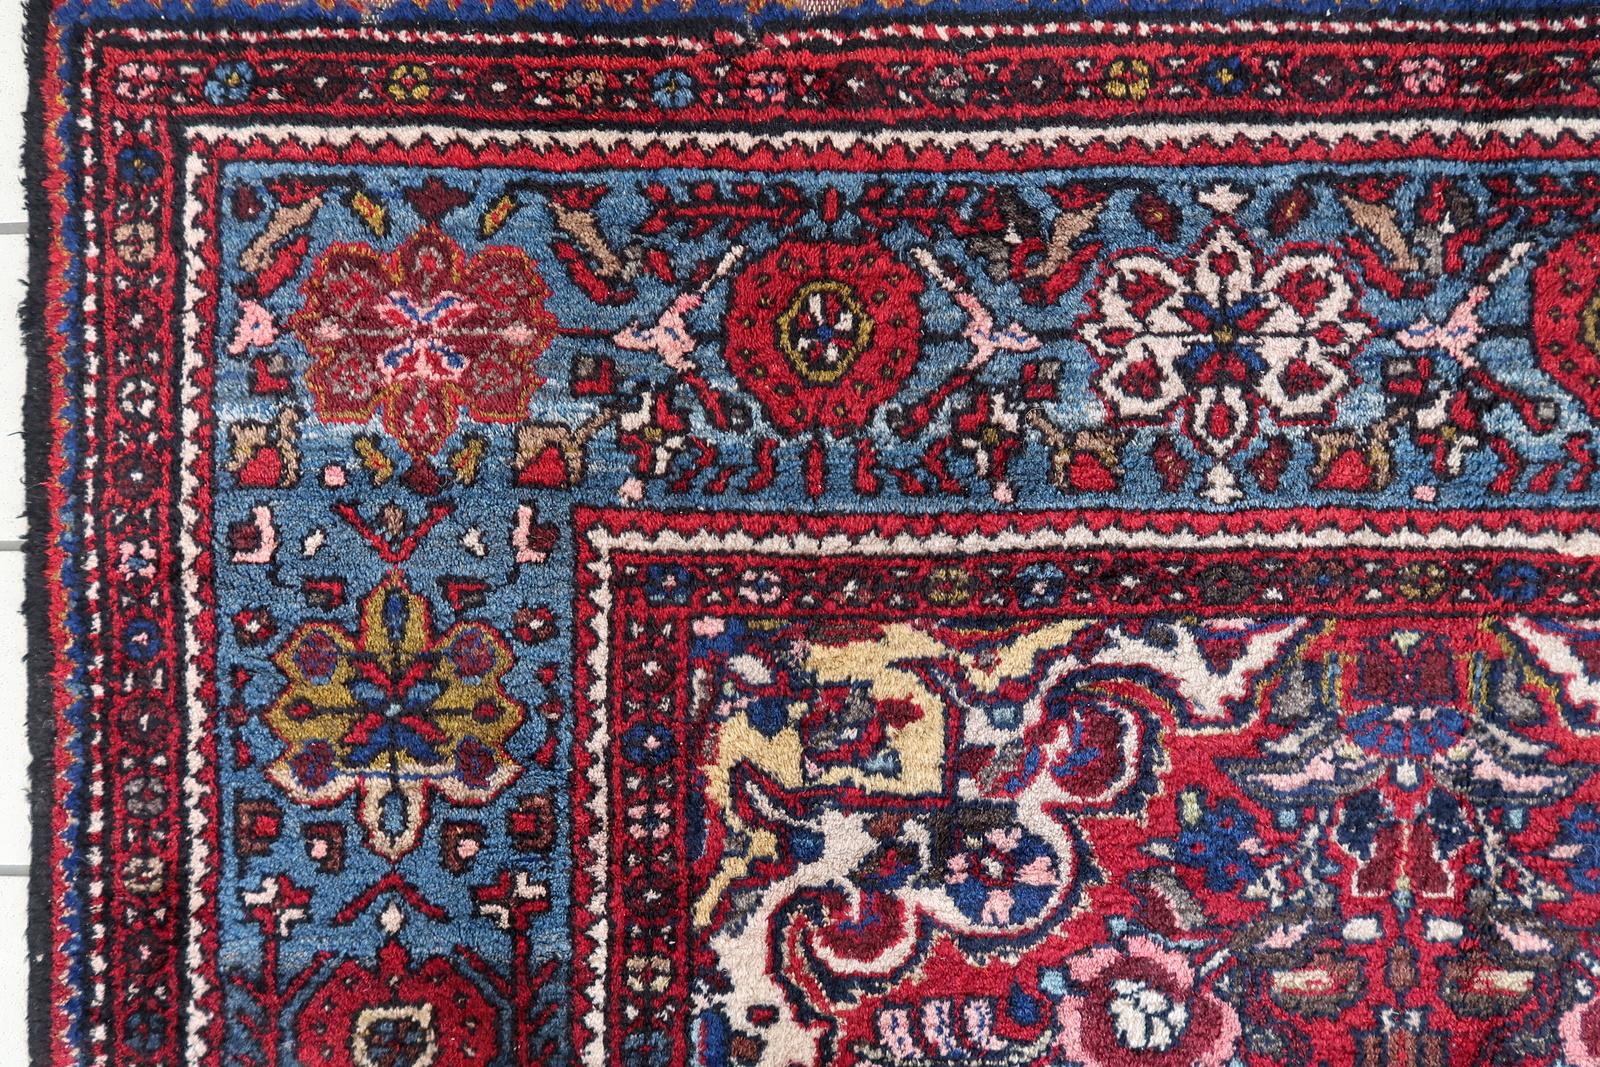 Handmade Vintage Persian Malayer Rug:

Design and Aesthetics:
Originating from the 1960s, this rug carries a rich history and timeless appeal.
Measuring 166cm x 324cm (approximately 5.4’ x 10.6’), it’s a substantial piece that commands